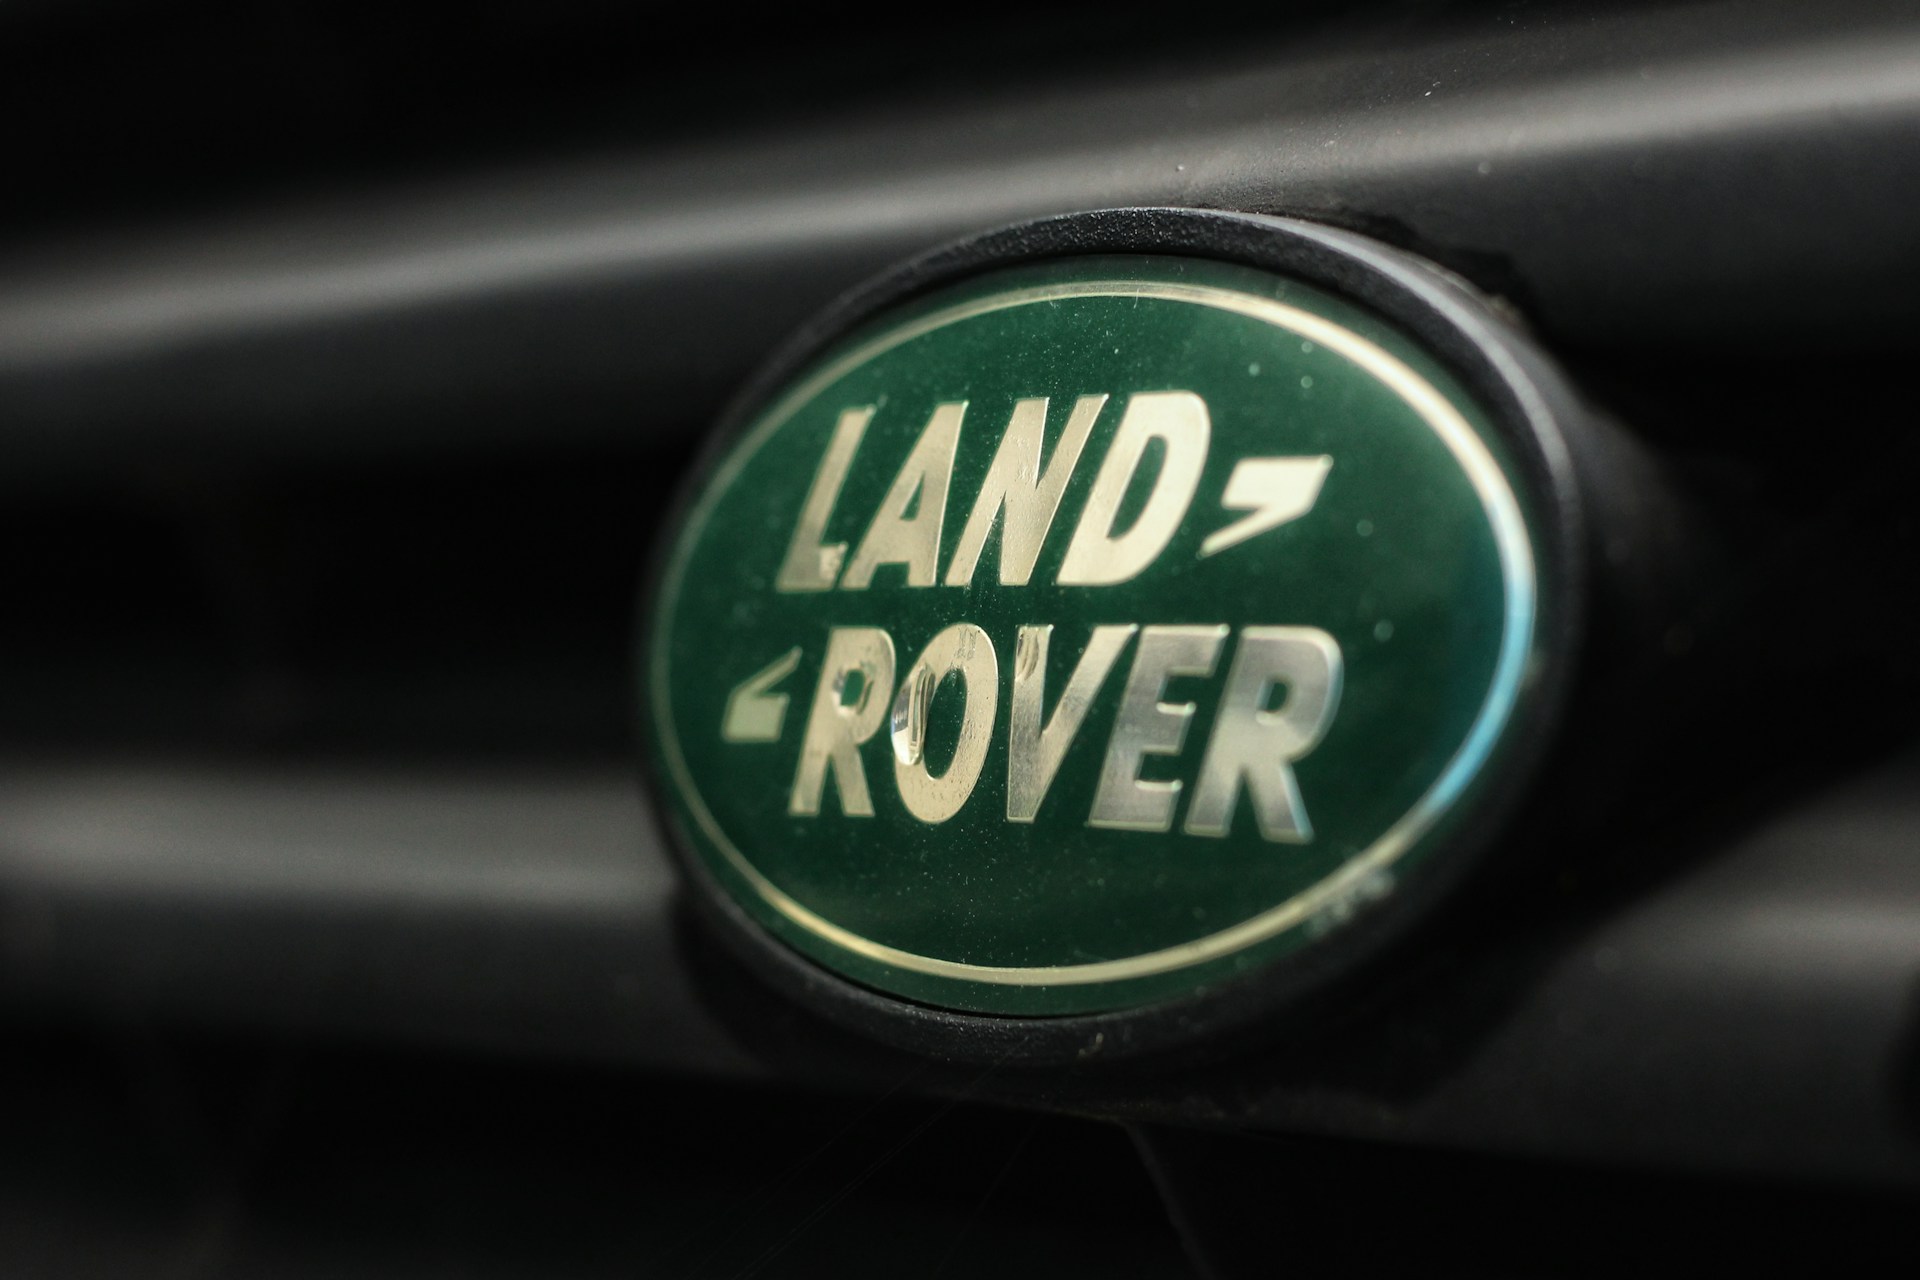 Close-up image of the Land Rover logo, featuring the words "LAND" above "ROVER" in a bold, serif font.